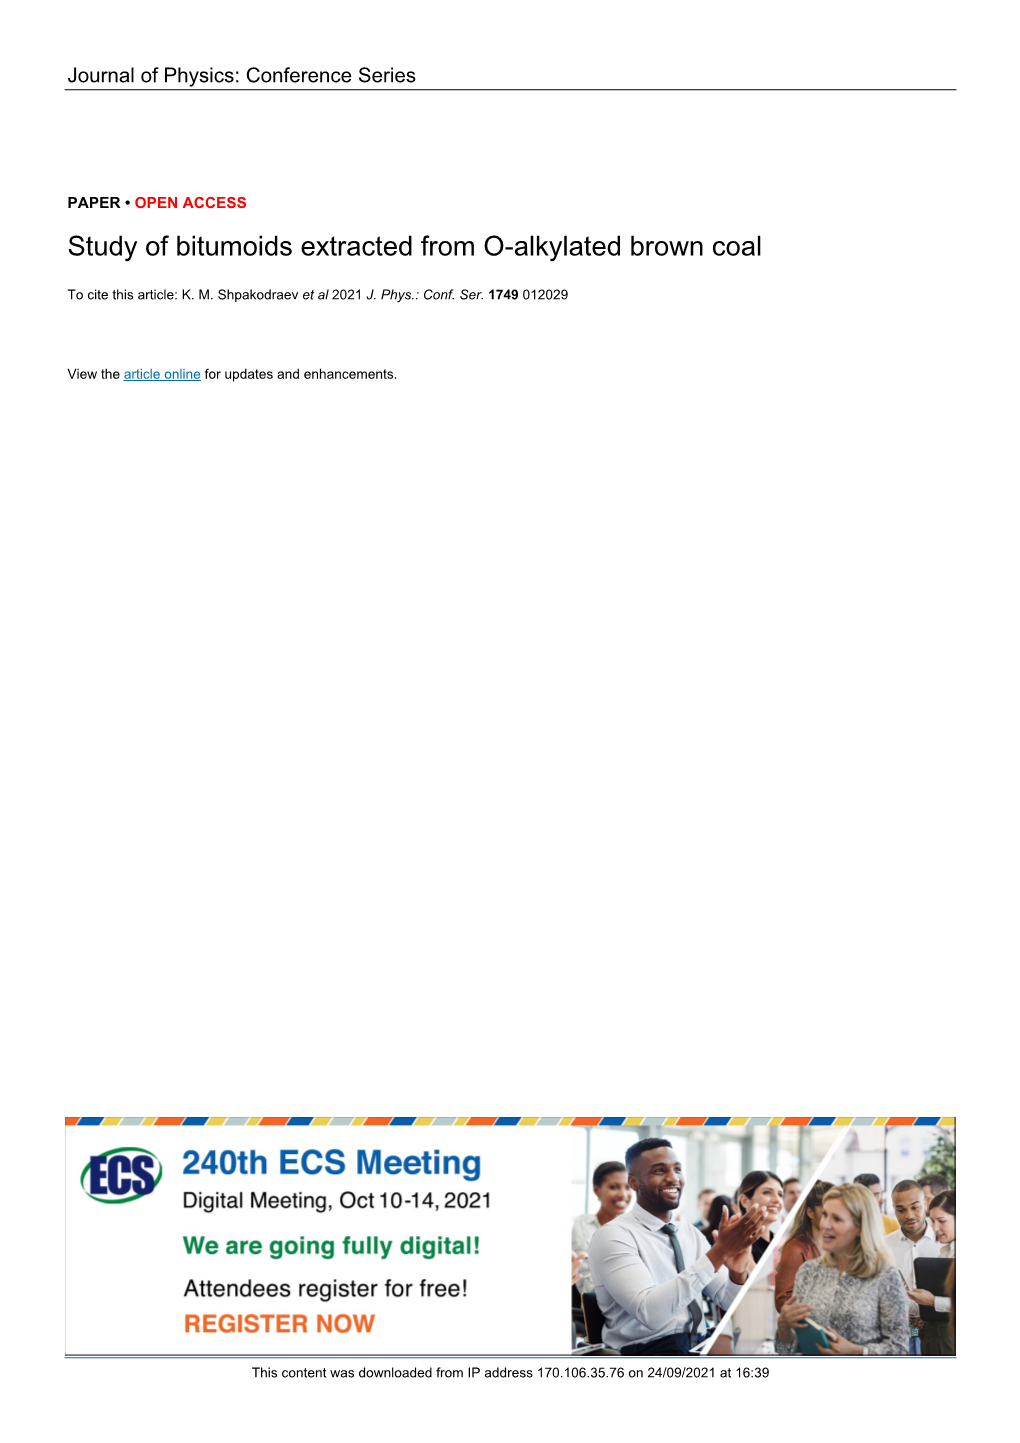 Study of Bitumoids Extracted from O-Alkylated Brown Coal